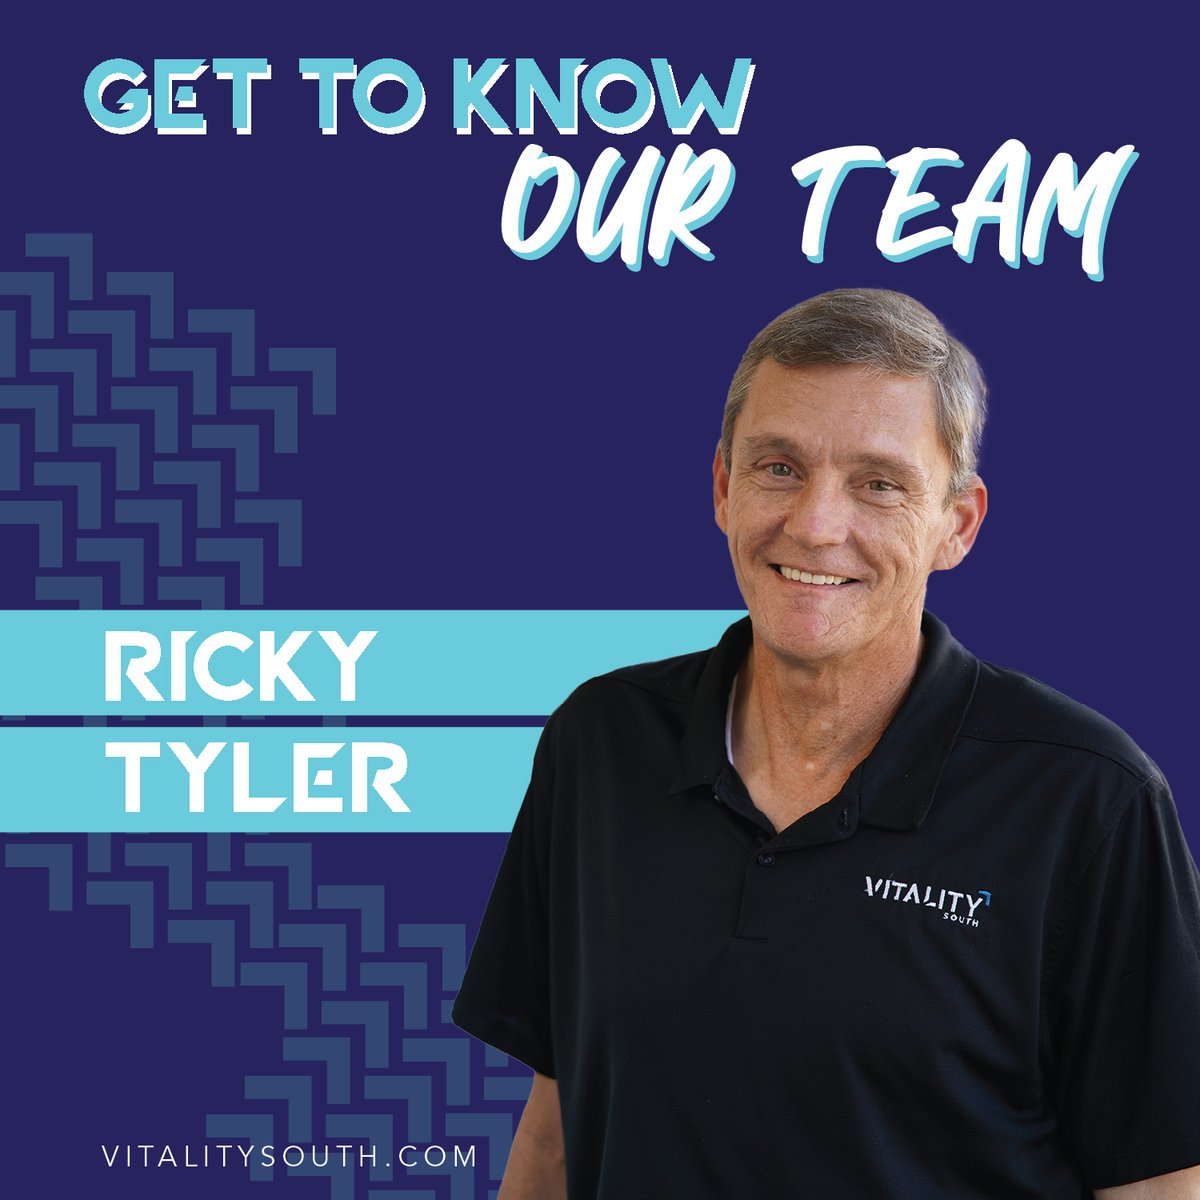 Meet Ricky, our exceptional team member at Vitality South! When not driving IT solutions, he's perfecting his swing on the golf course. ⛳ Ricky's dedication extends from the office to the fairway, bringing vitality to everything he does. Here's to more victories! #TeamSpotlight